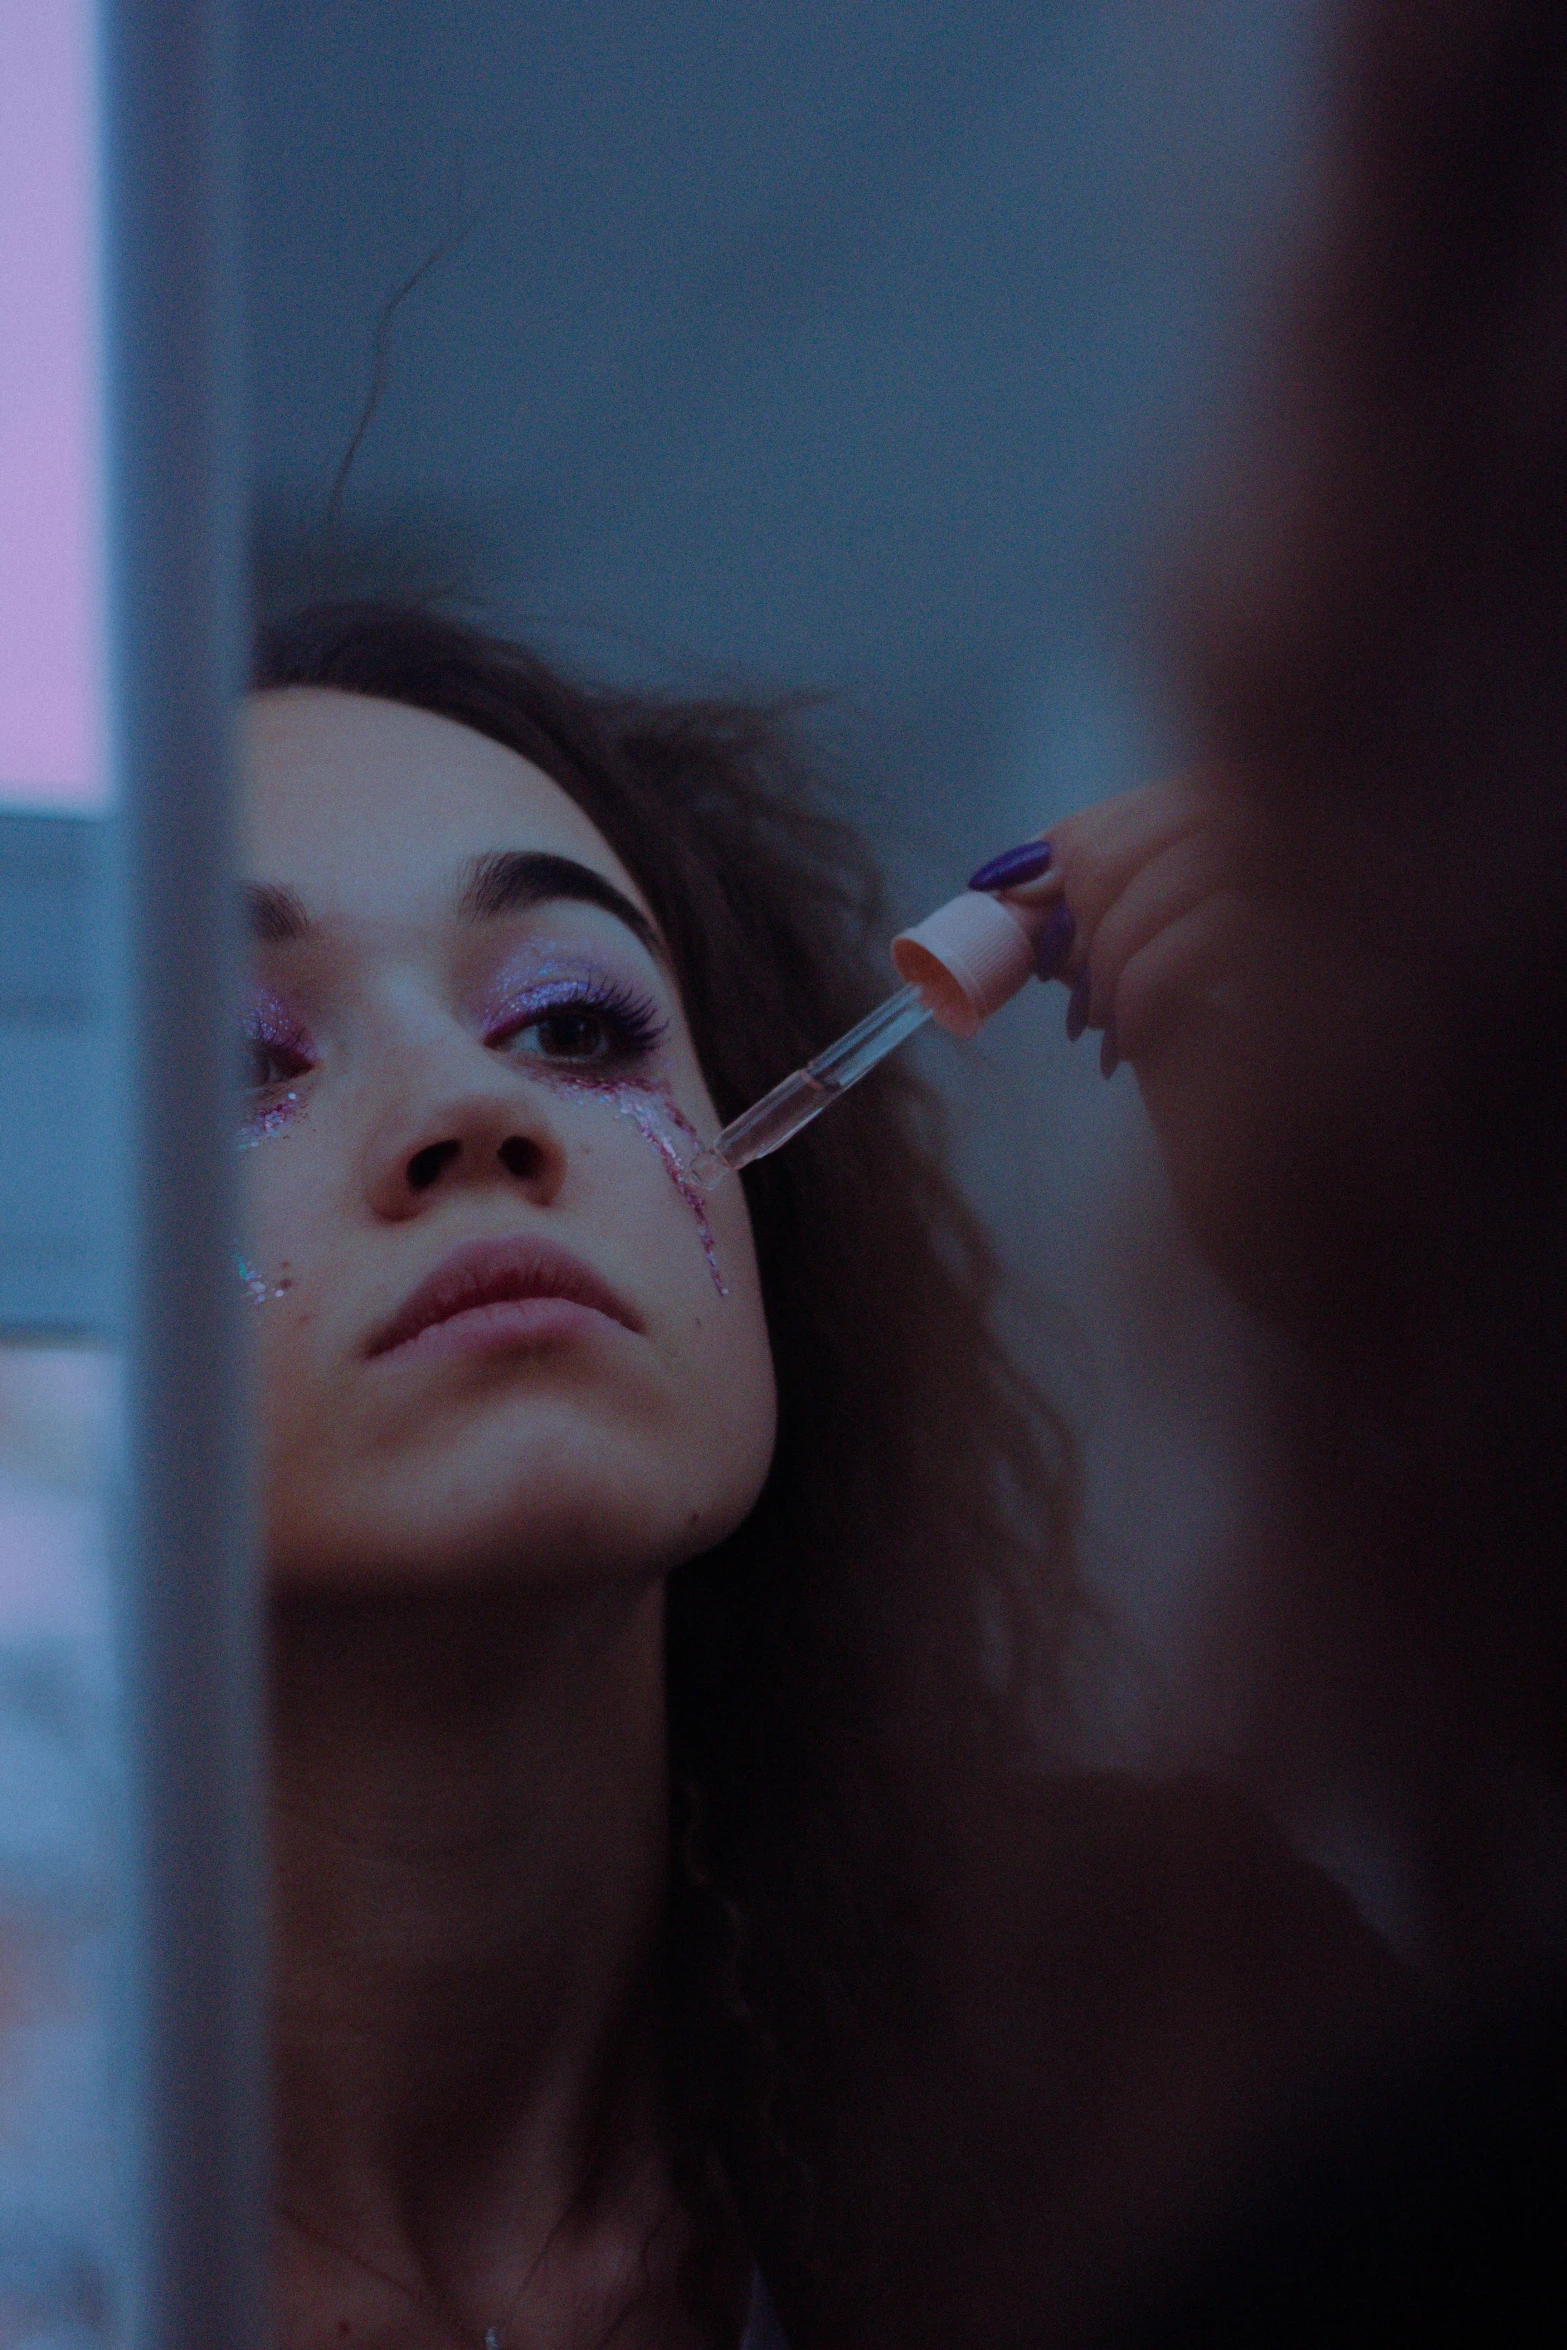 a woman getting her makeup done in front of a mirror, an album cover, trending on pexels, antipodeans, mixed race, with an iv drip, still from movie, [ theatrical ]